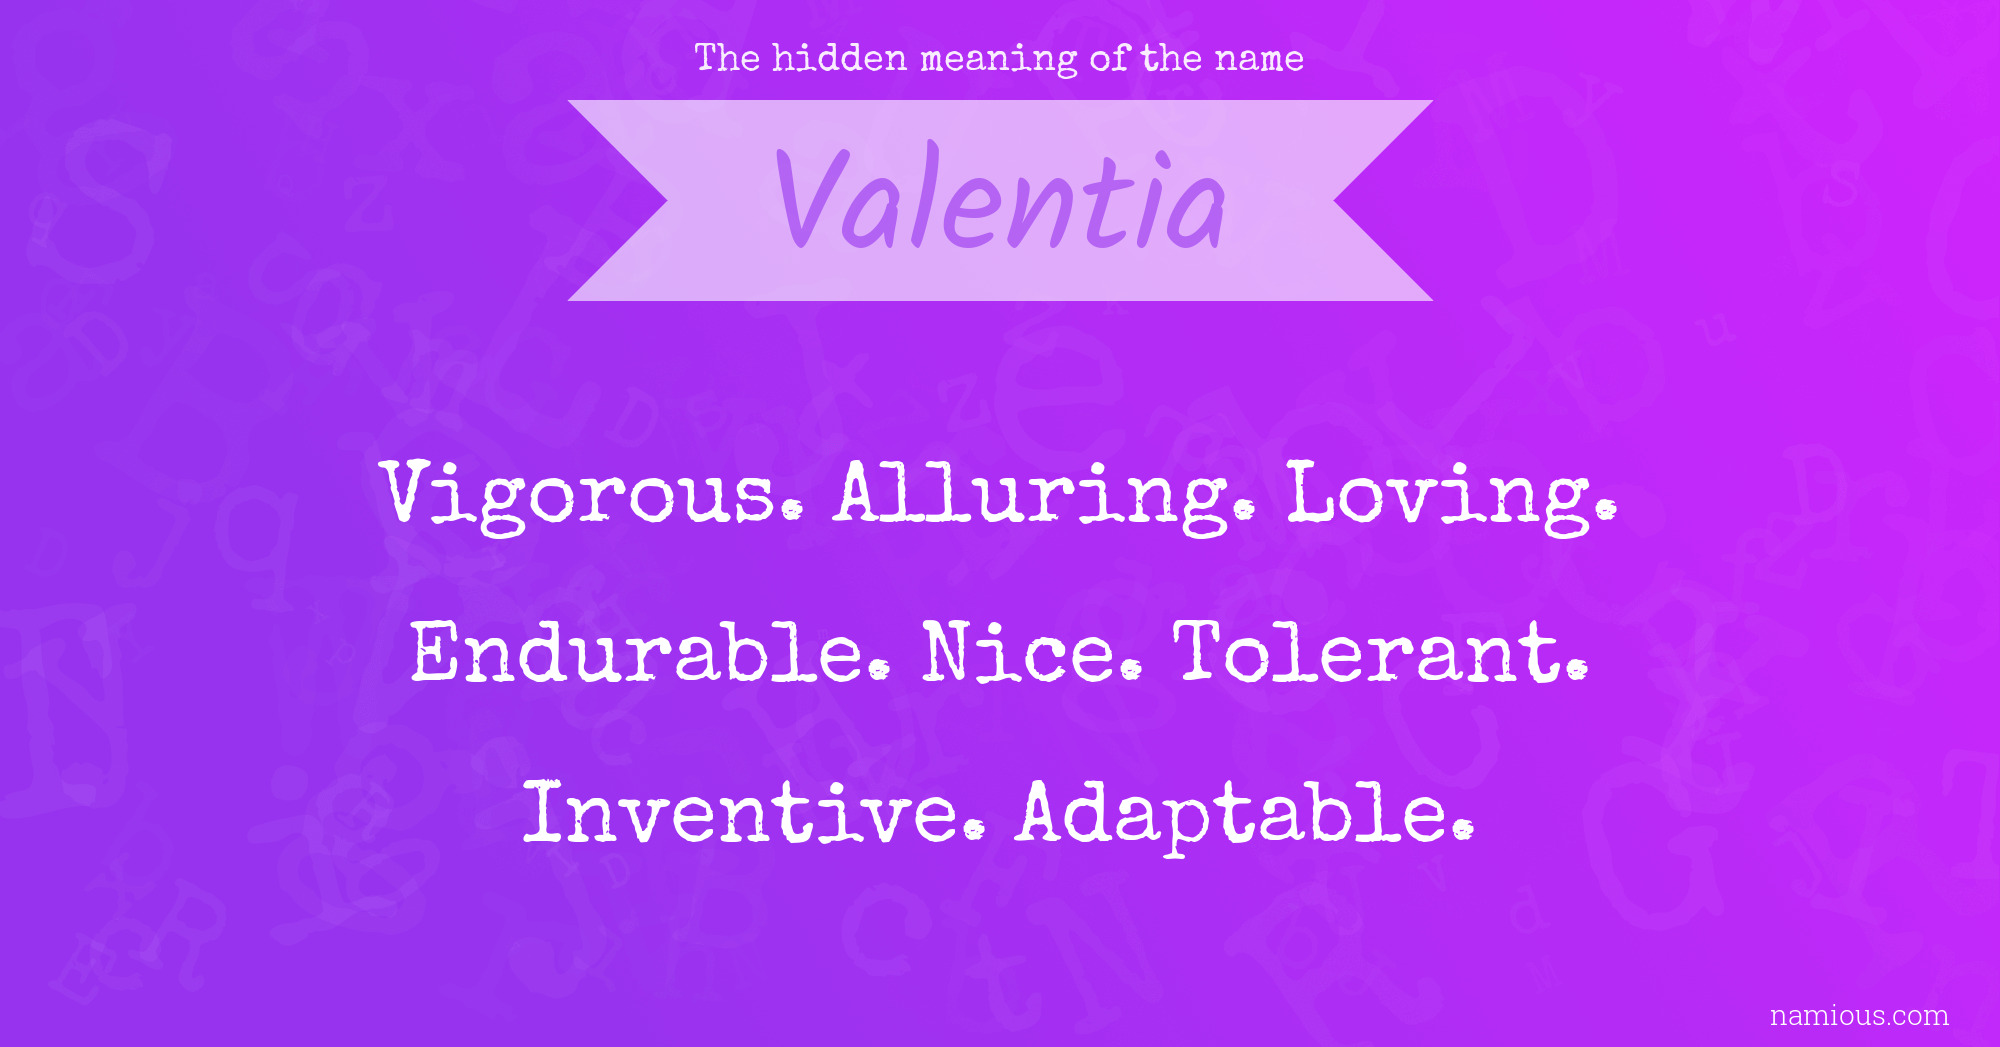 The hidden meaning of the name Valentia